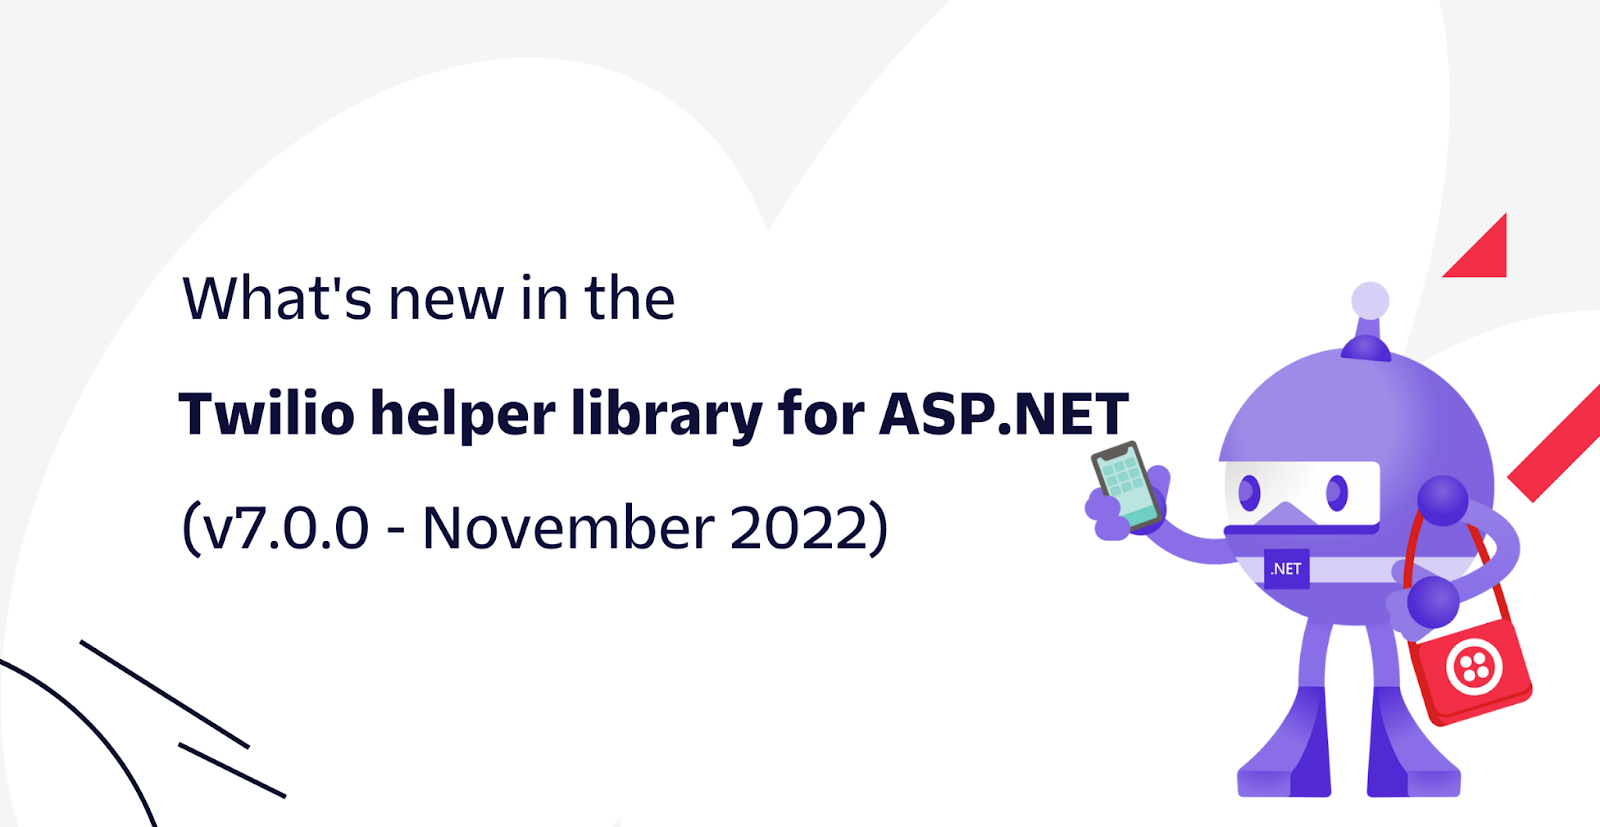 What's new in the Twilio helper library for ASP.NET (v7.0.0 - November 2022)